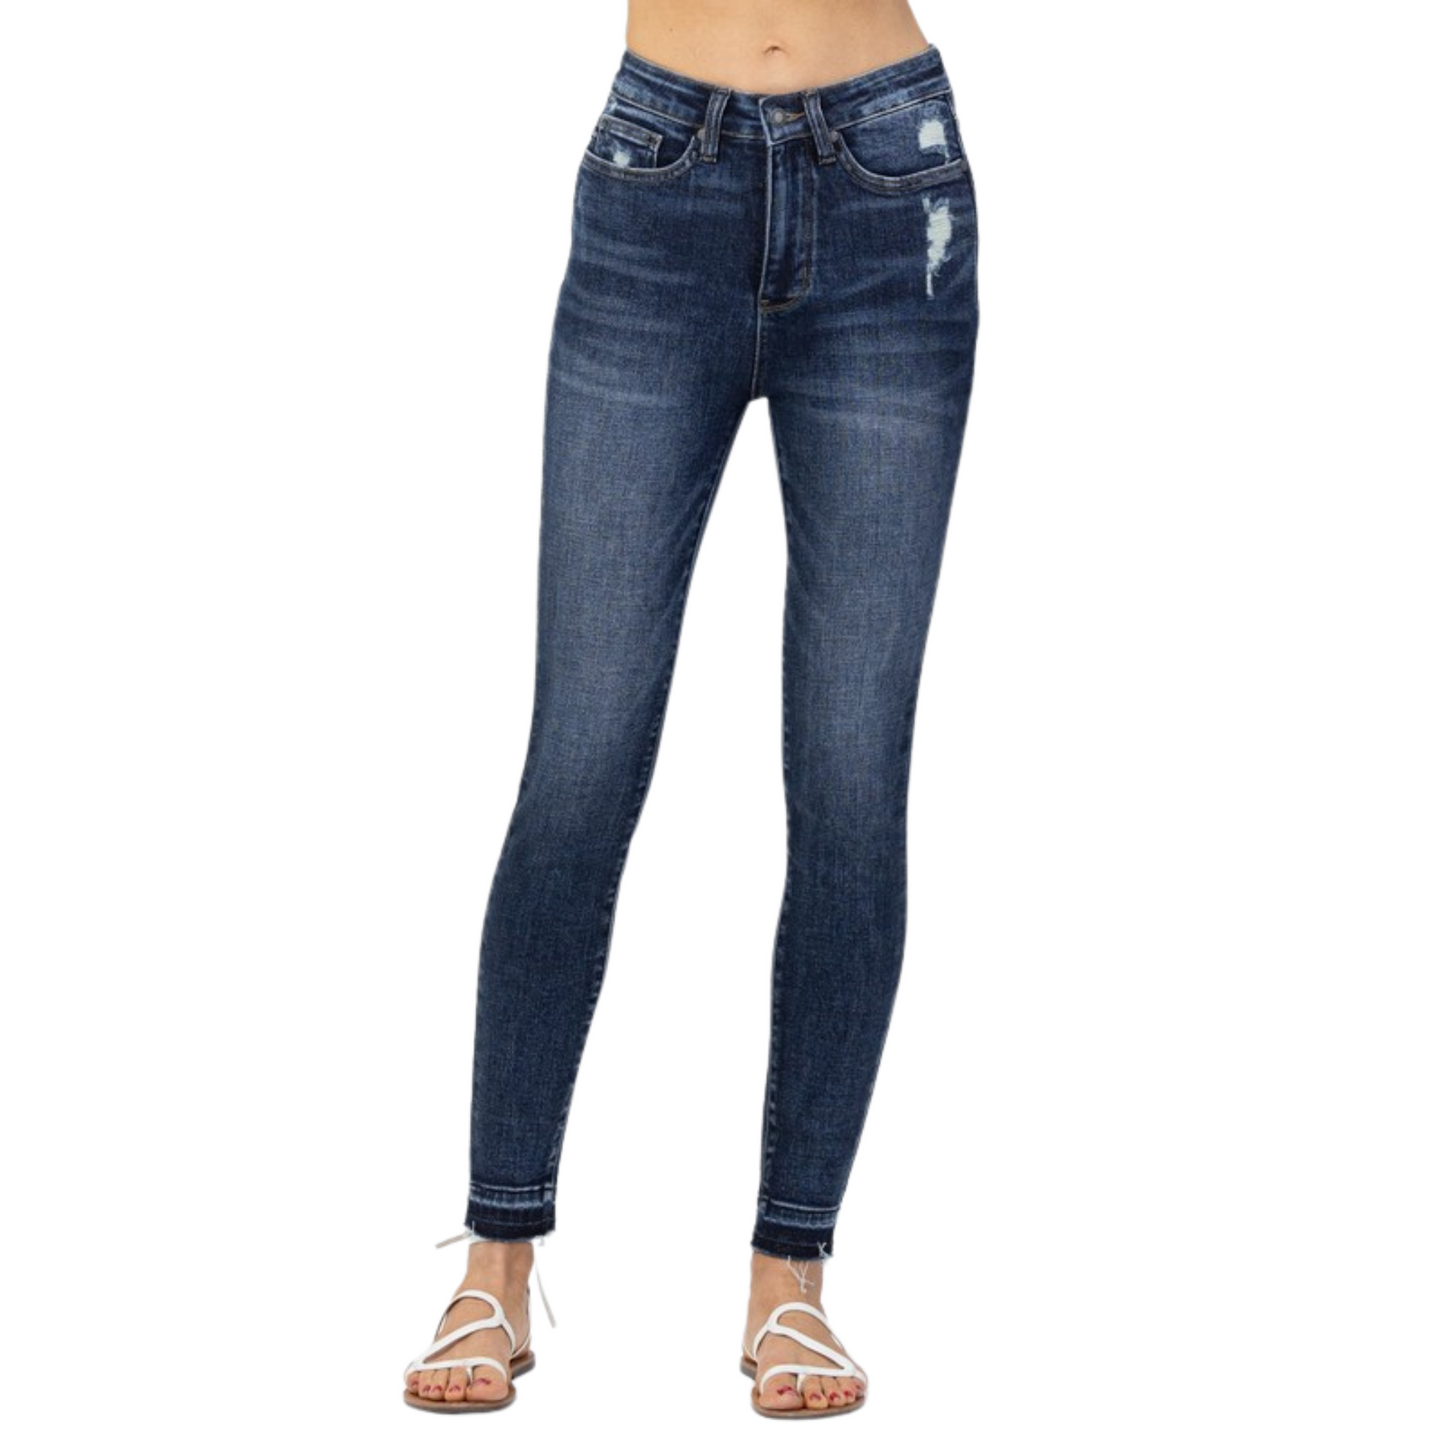 Say goodbye to uncomfortable skinny jeans and hello to our Hi-Waisted Skinny Jeans. These jeans feature a dark wash for a sleek and stylish look with tummy control that helps you look and feel your best. Perfect for both fashion and comfort.